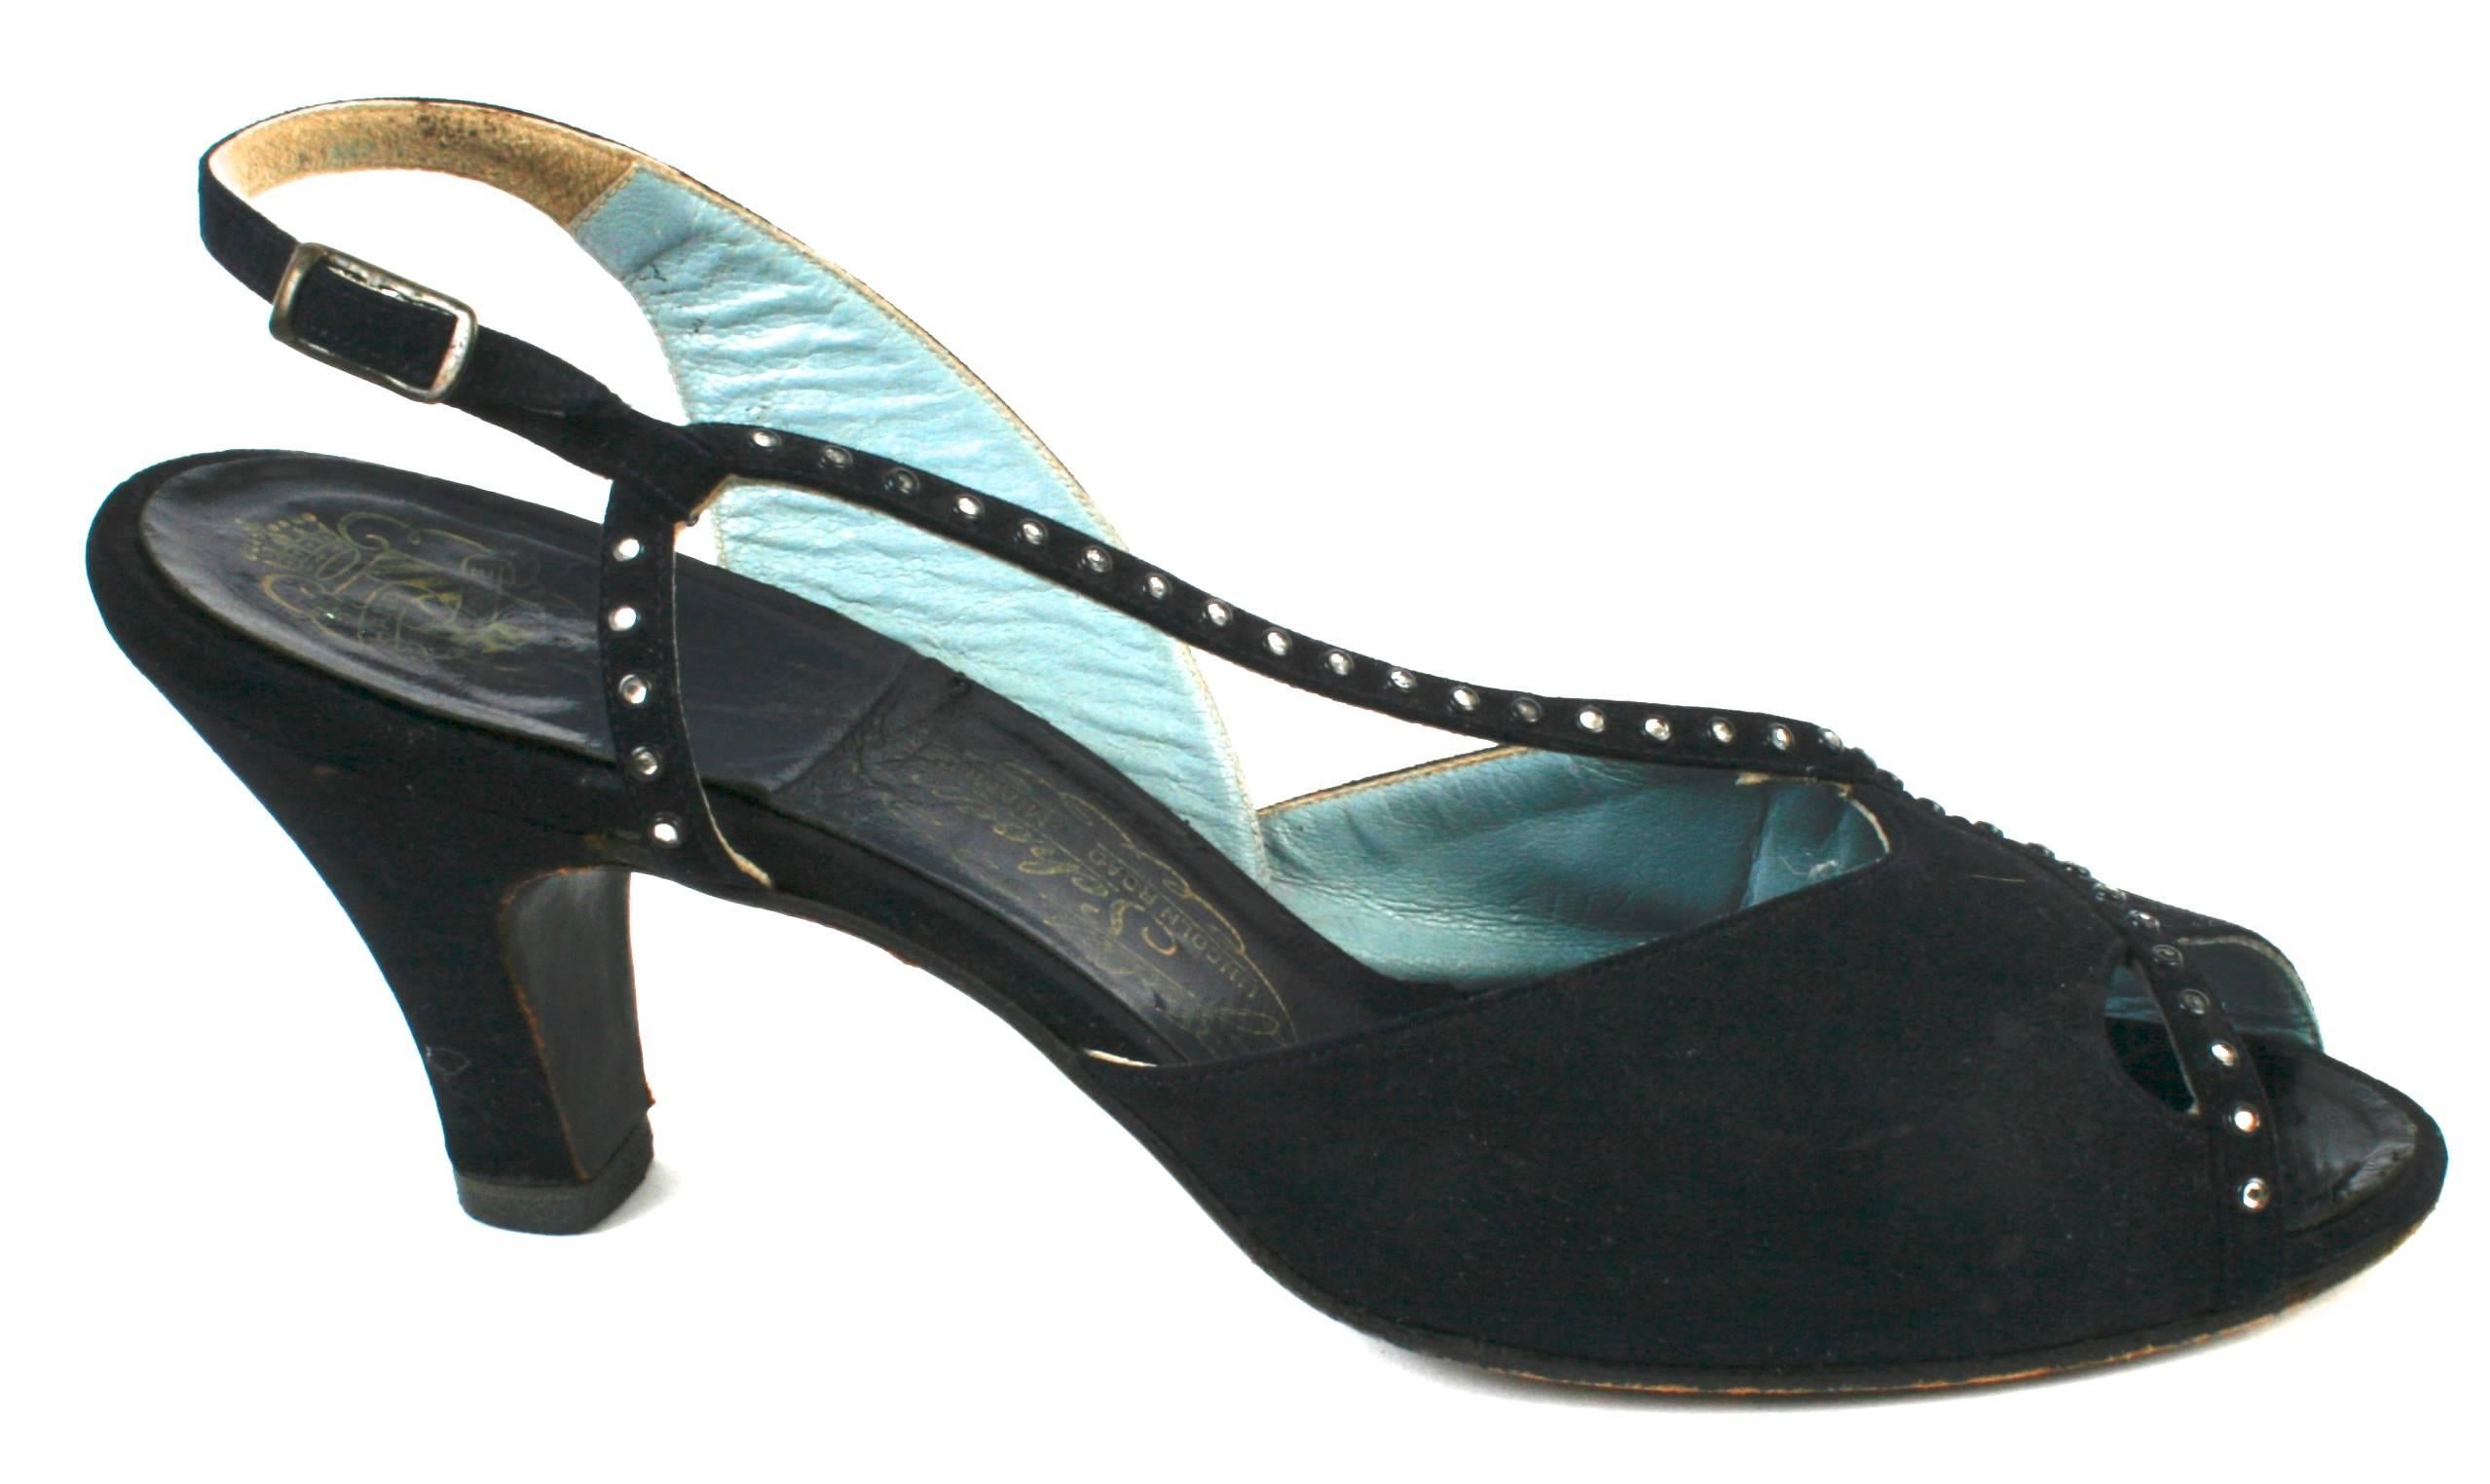 Handmade Peep Toe black suede sling back pumps with glass rhinestone trimmed straps. Lined in a powder blue leather.  Label reads Hand Made Jules Schoen Lincoln Road Miami. No size. Inside sole measures 10